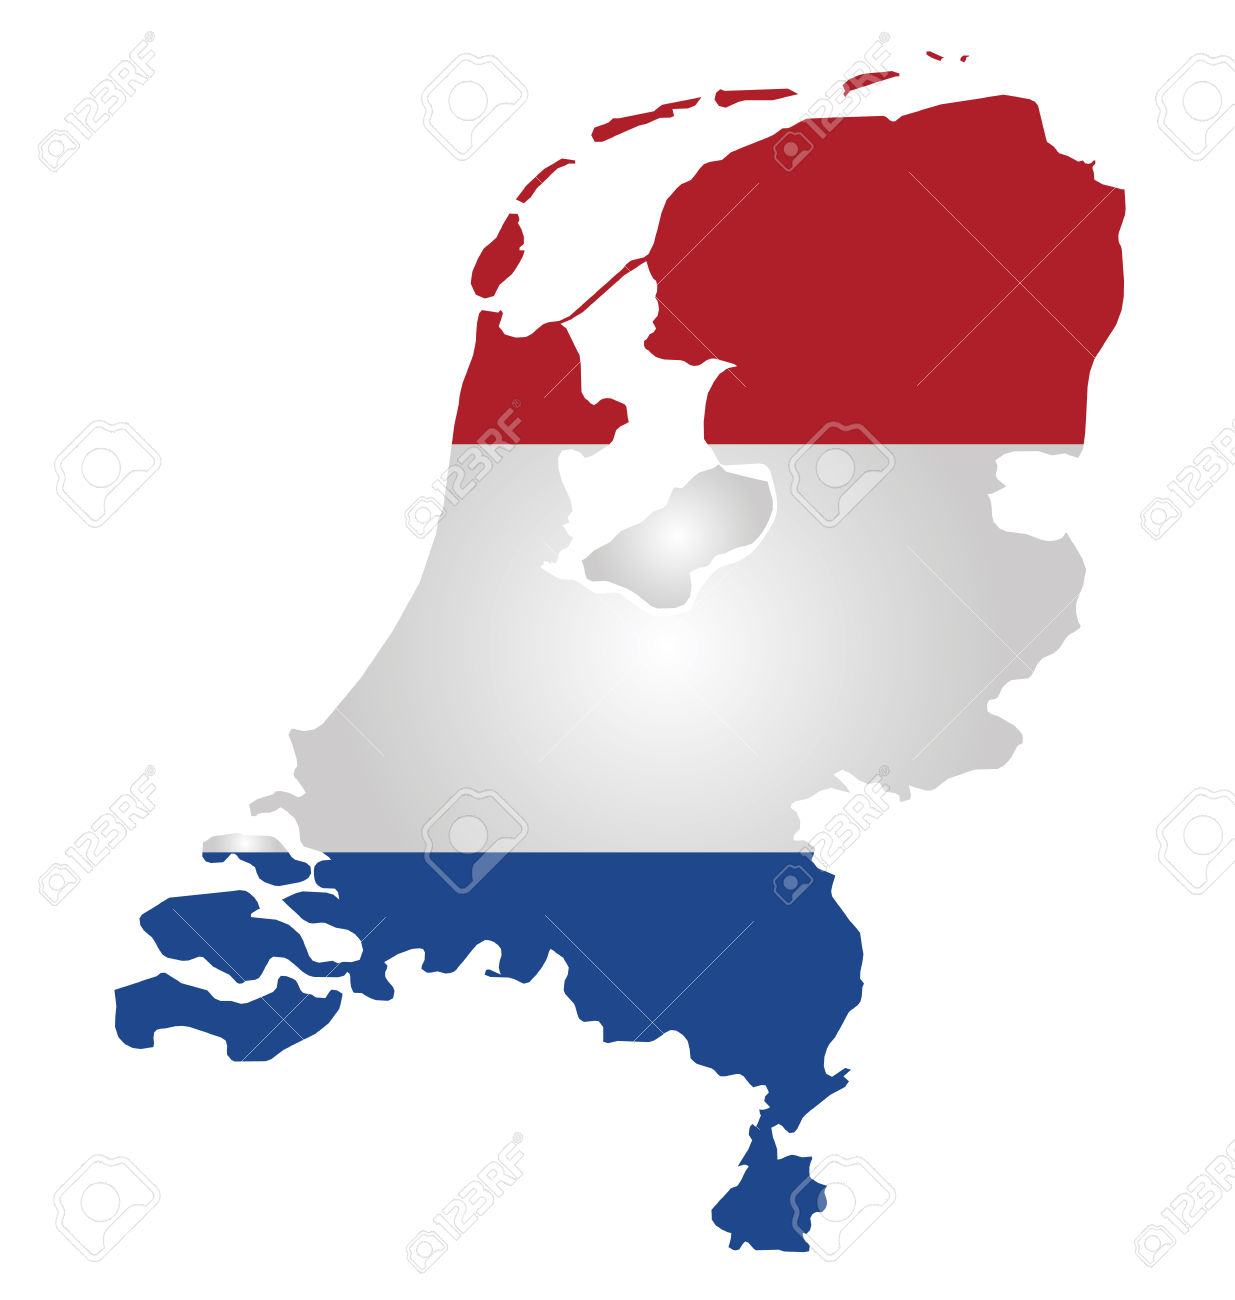 1,333 Kingdom Of The Netherlands Stock Vector Illustration And.